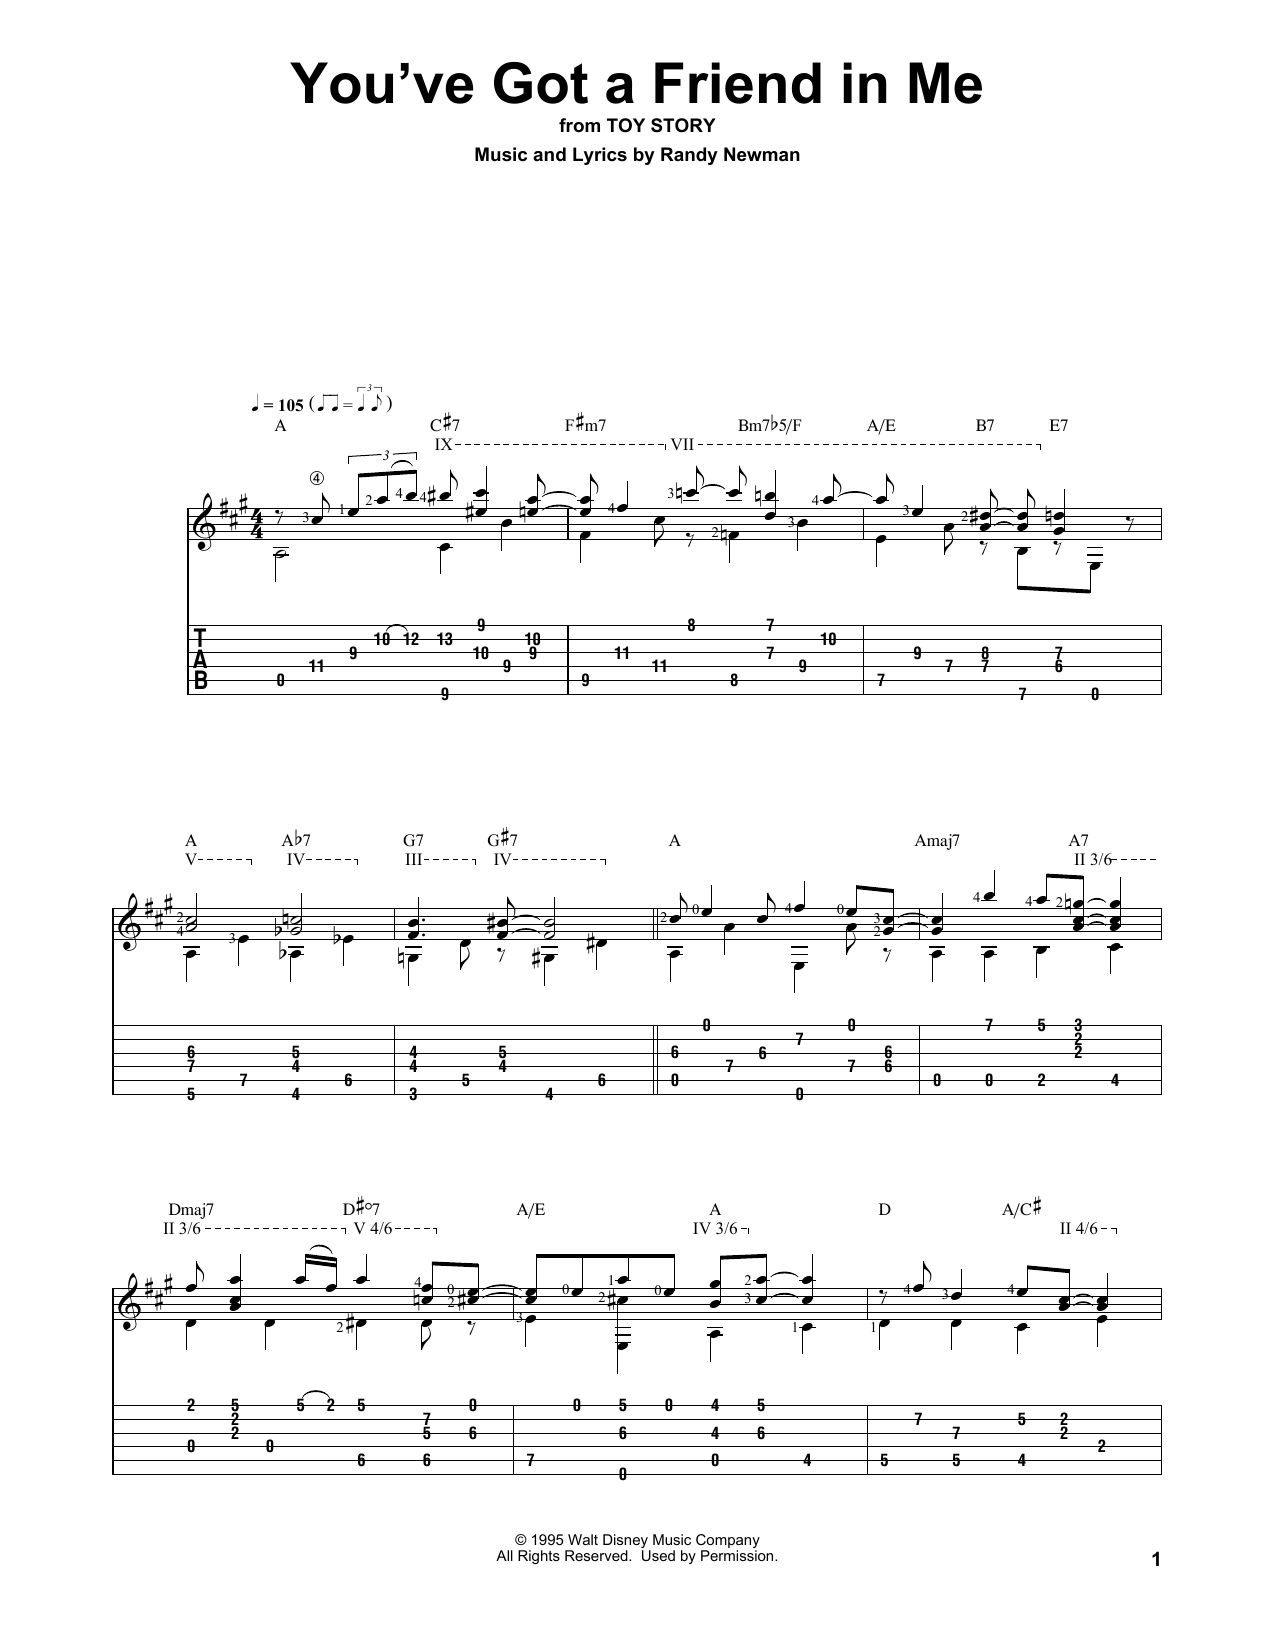 Aubergine smykker lette Randy Newman "You've Got A Friend In Me (from Toy Story)" Sheet Music Notes  | Download Printable PDF Score 81104